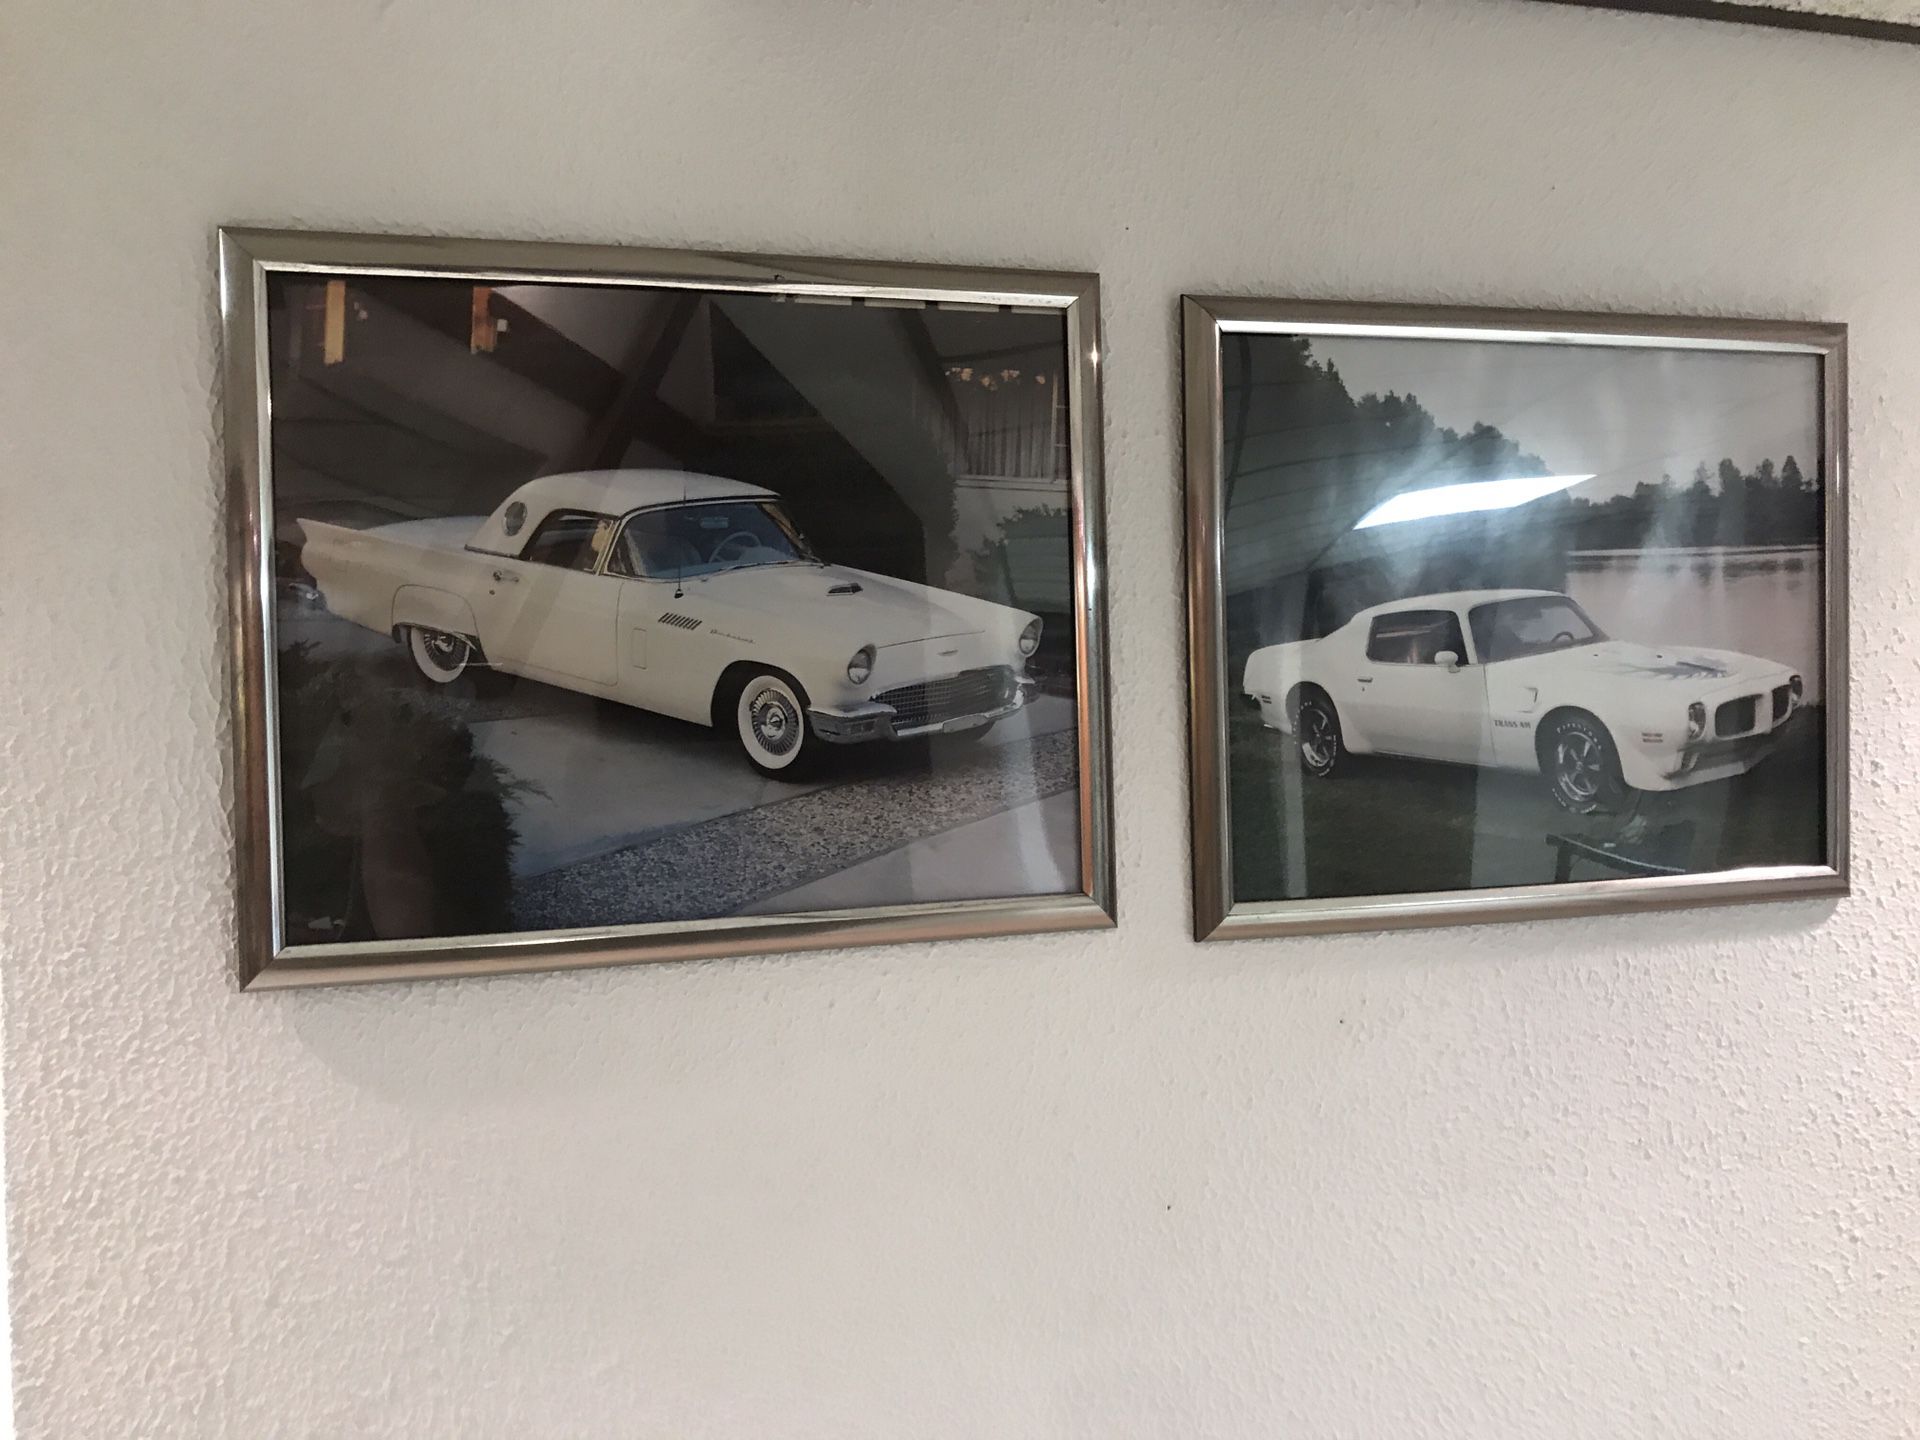 Vintage car models photos with frames included